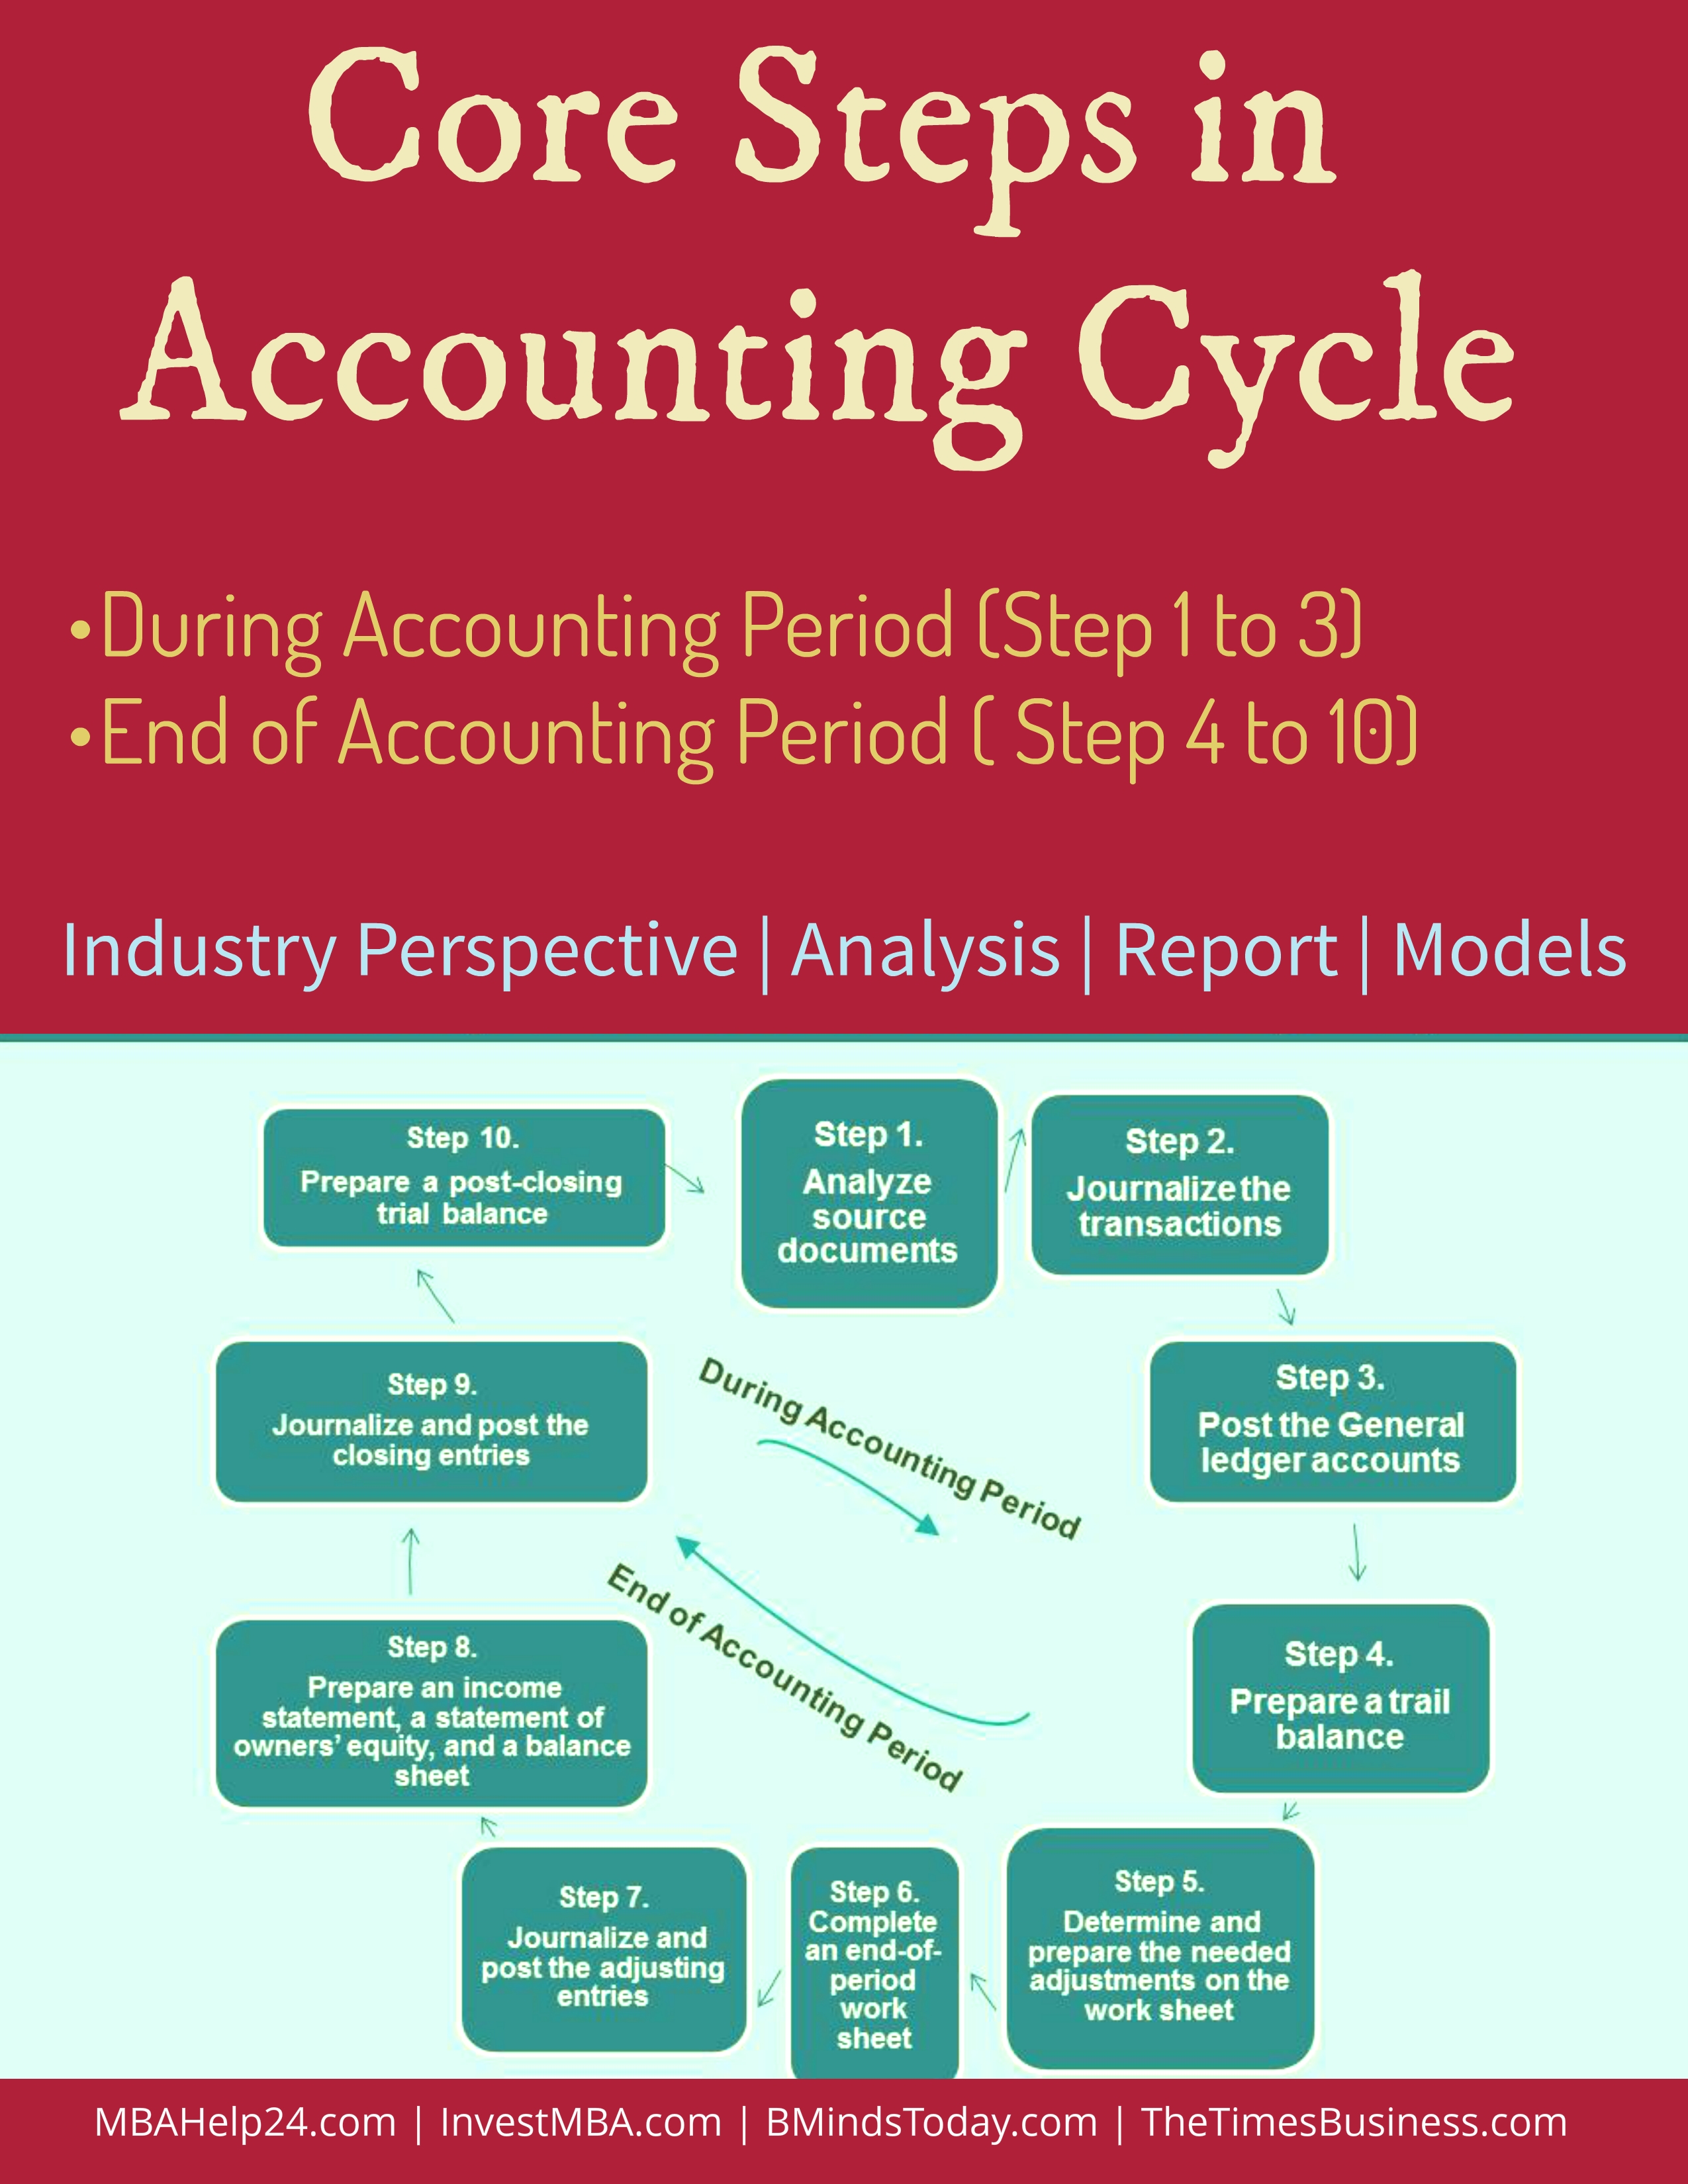 Core steps in accounting cycle Accounting Cycle Core Steps in Accounting Cycle | During &#038; End of Accounting Period Core steps in accounting cycle core steps in accounting cycle Core Steps in Accounting Cycle Core steps in accounting cycle